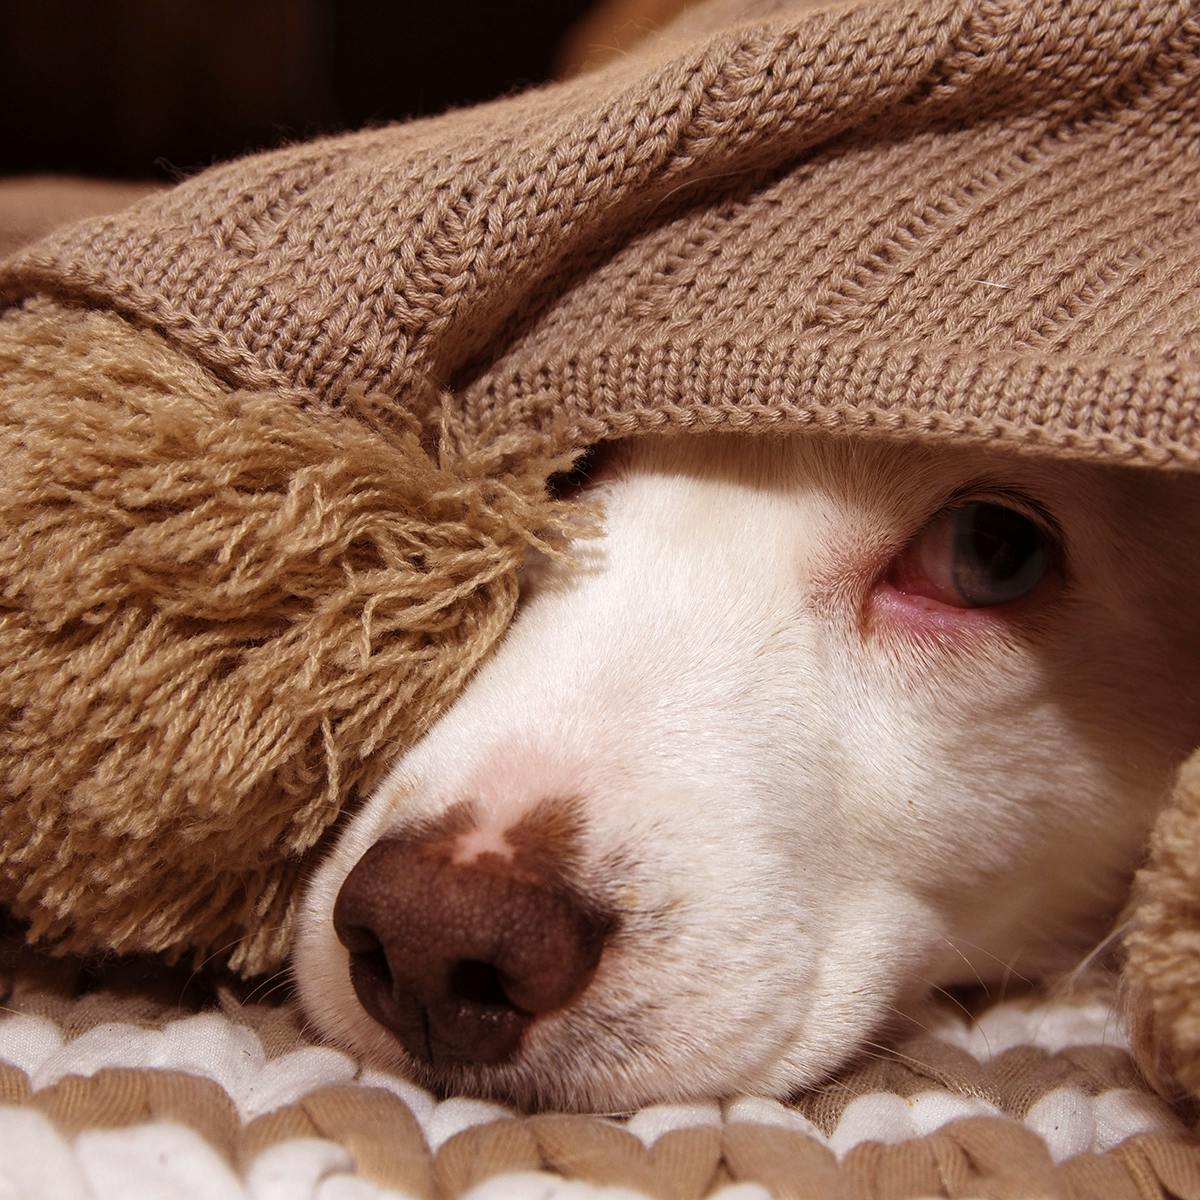 Dog hiding under blanket, as an example of holiday stress